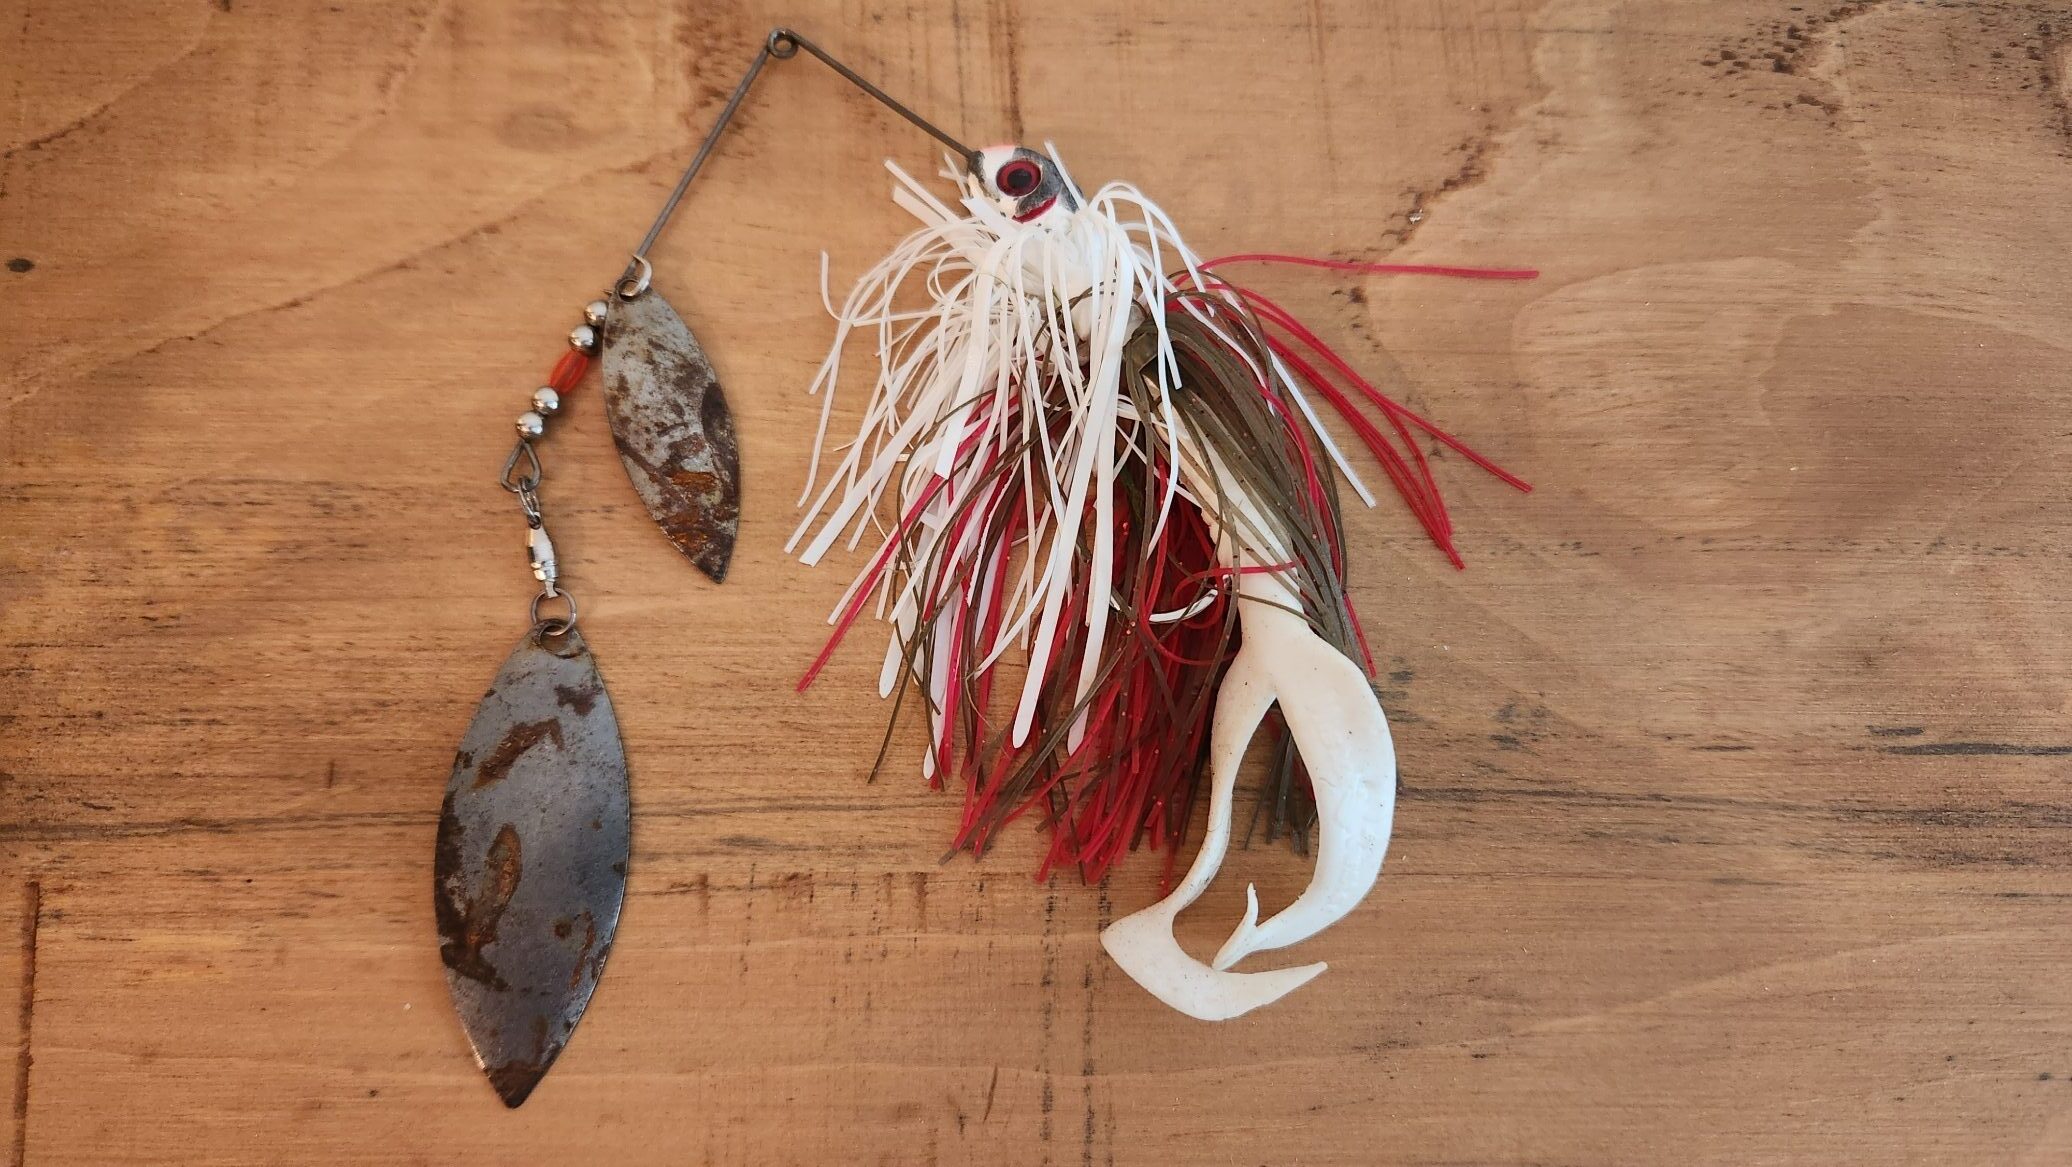 Spinnerbait lure with willow leaf spoon. White with white and red skirt. Two-tailed worm leader.